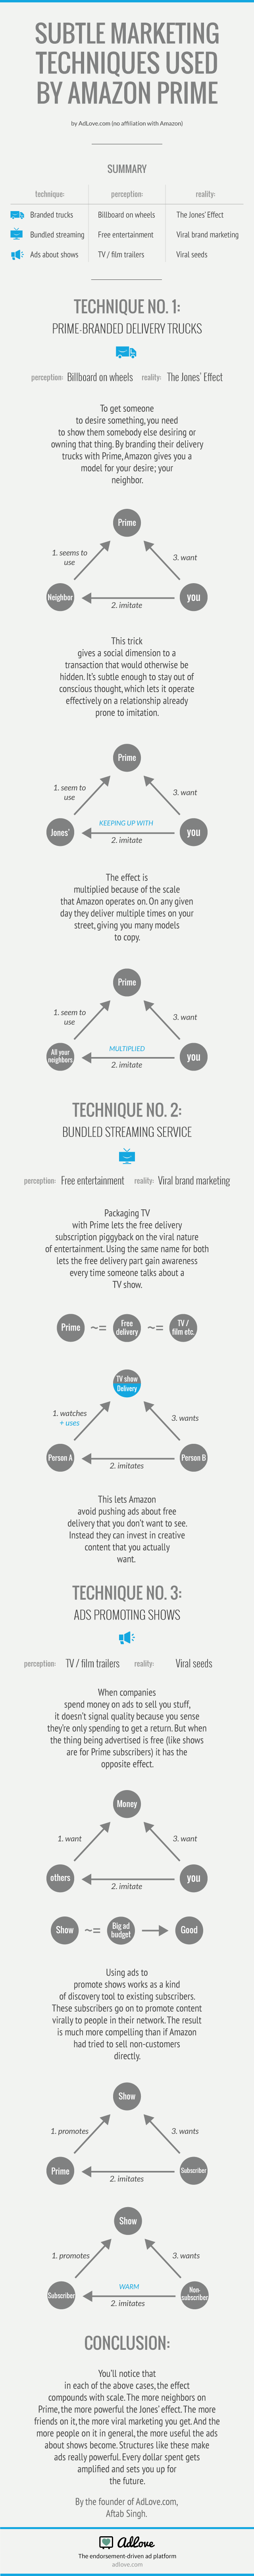 Infographic deconstructing subtle marketing techniques used by Amazon Prime